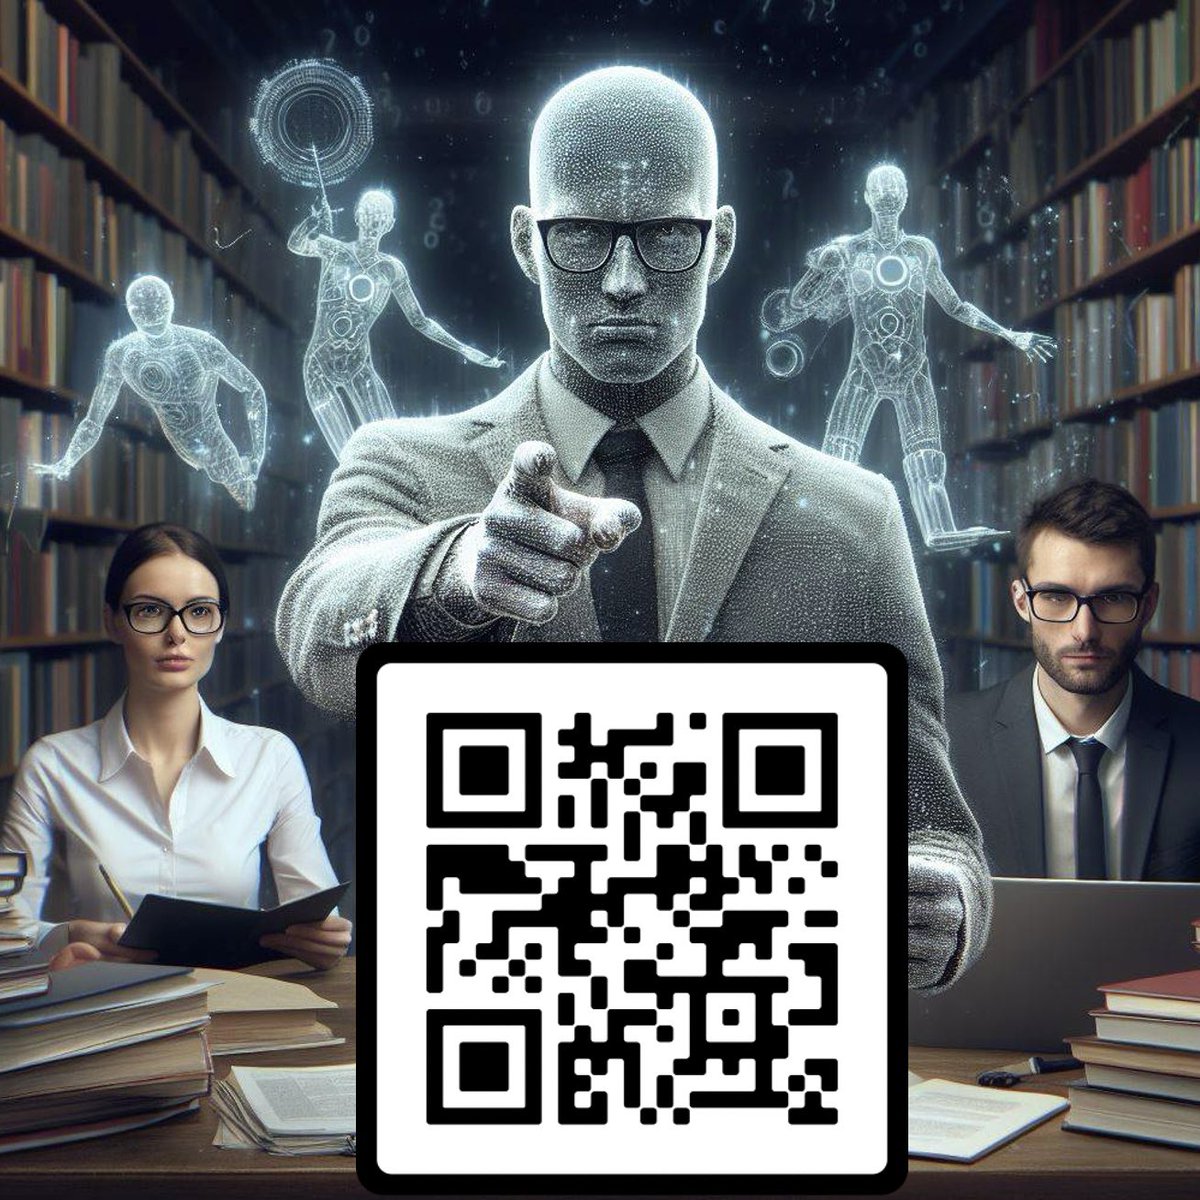 Are You The New Research Librarian? #DataScientist #forskbib #biblioteksjob #libraryjob